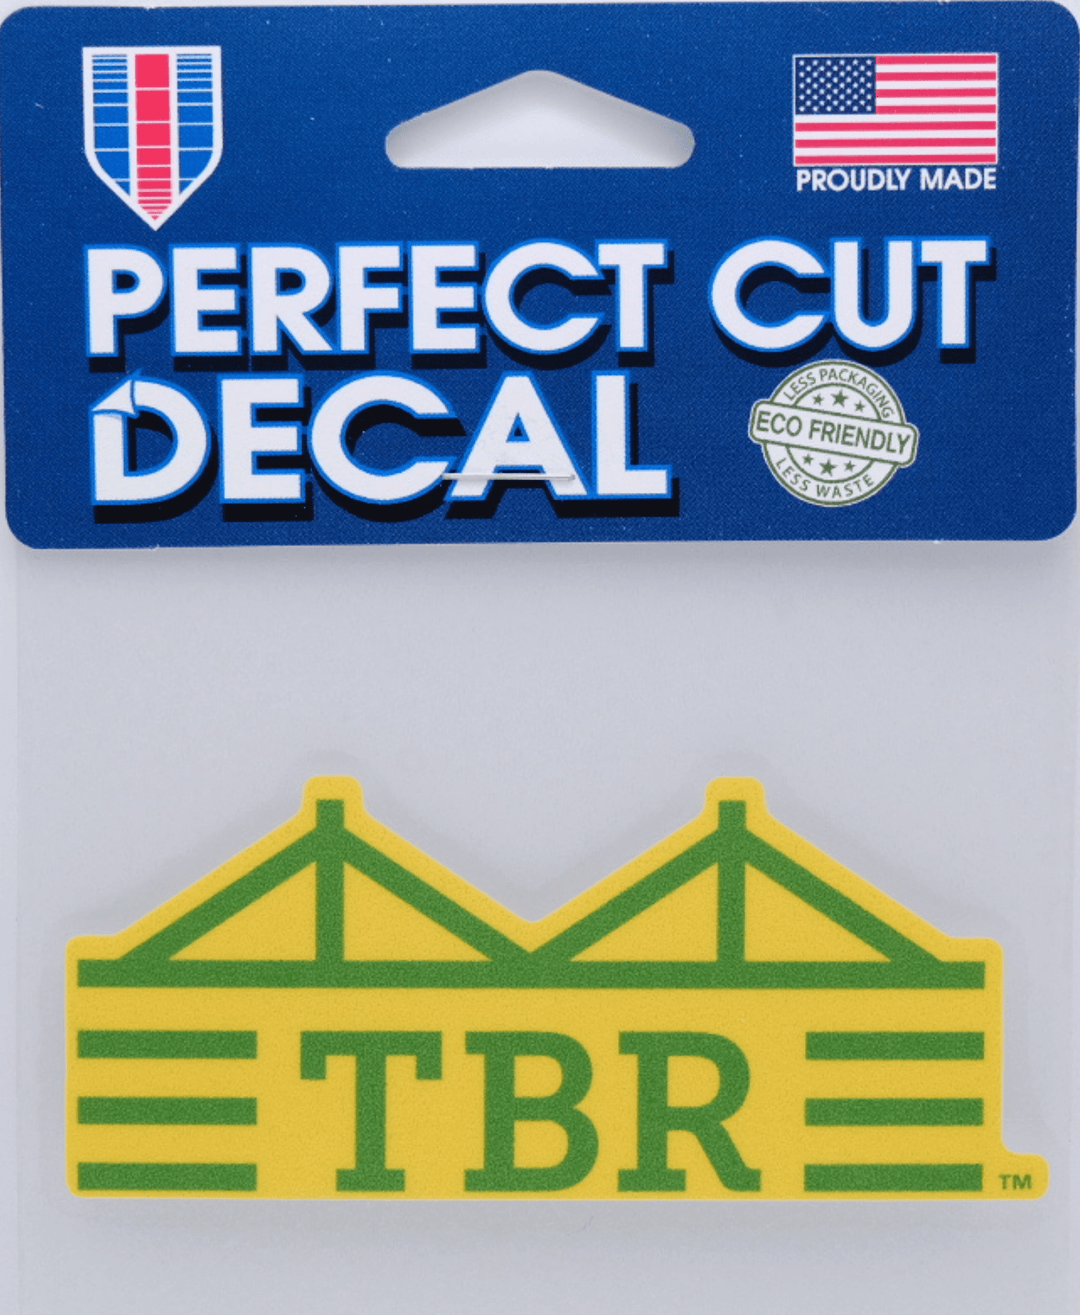 ROWDIES YELLOW TBR BRIDGE DECAL - The Bay Republic | Team Store of the Tampa Bay Rays & Rowdies